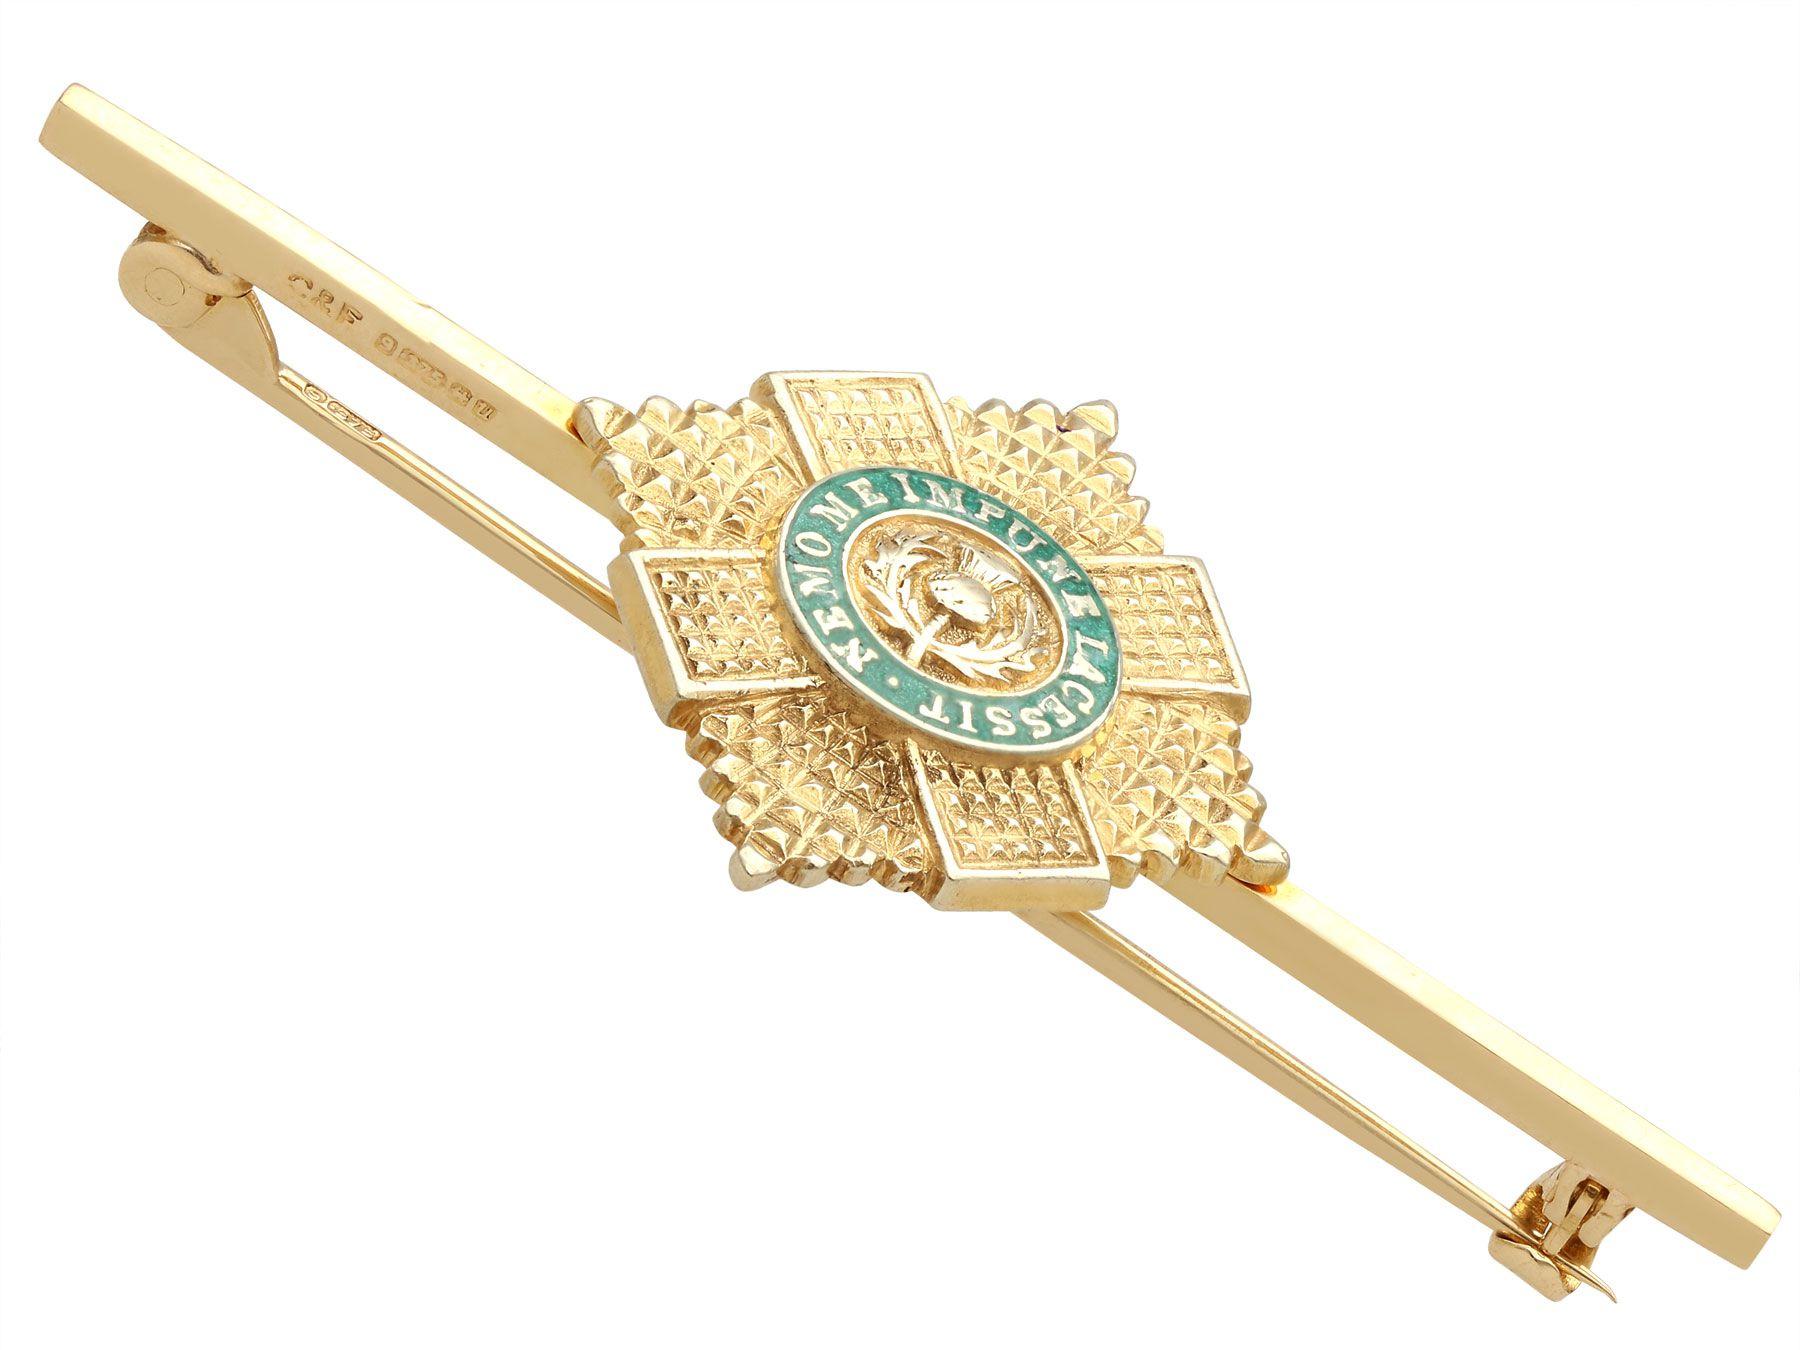 A fine and impressive vintage Scots Guard Brooch in 9 karat yellow gold and enamel; part of our diverse collection of military related items.

This impressive vintage Scots Guards regimental brooch has been crafted in 9k yellow gold.

The bar brooch